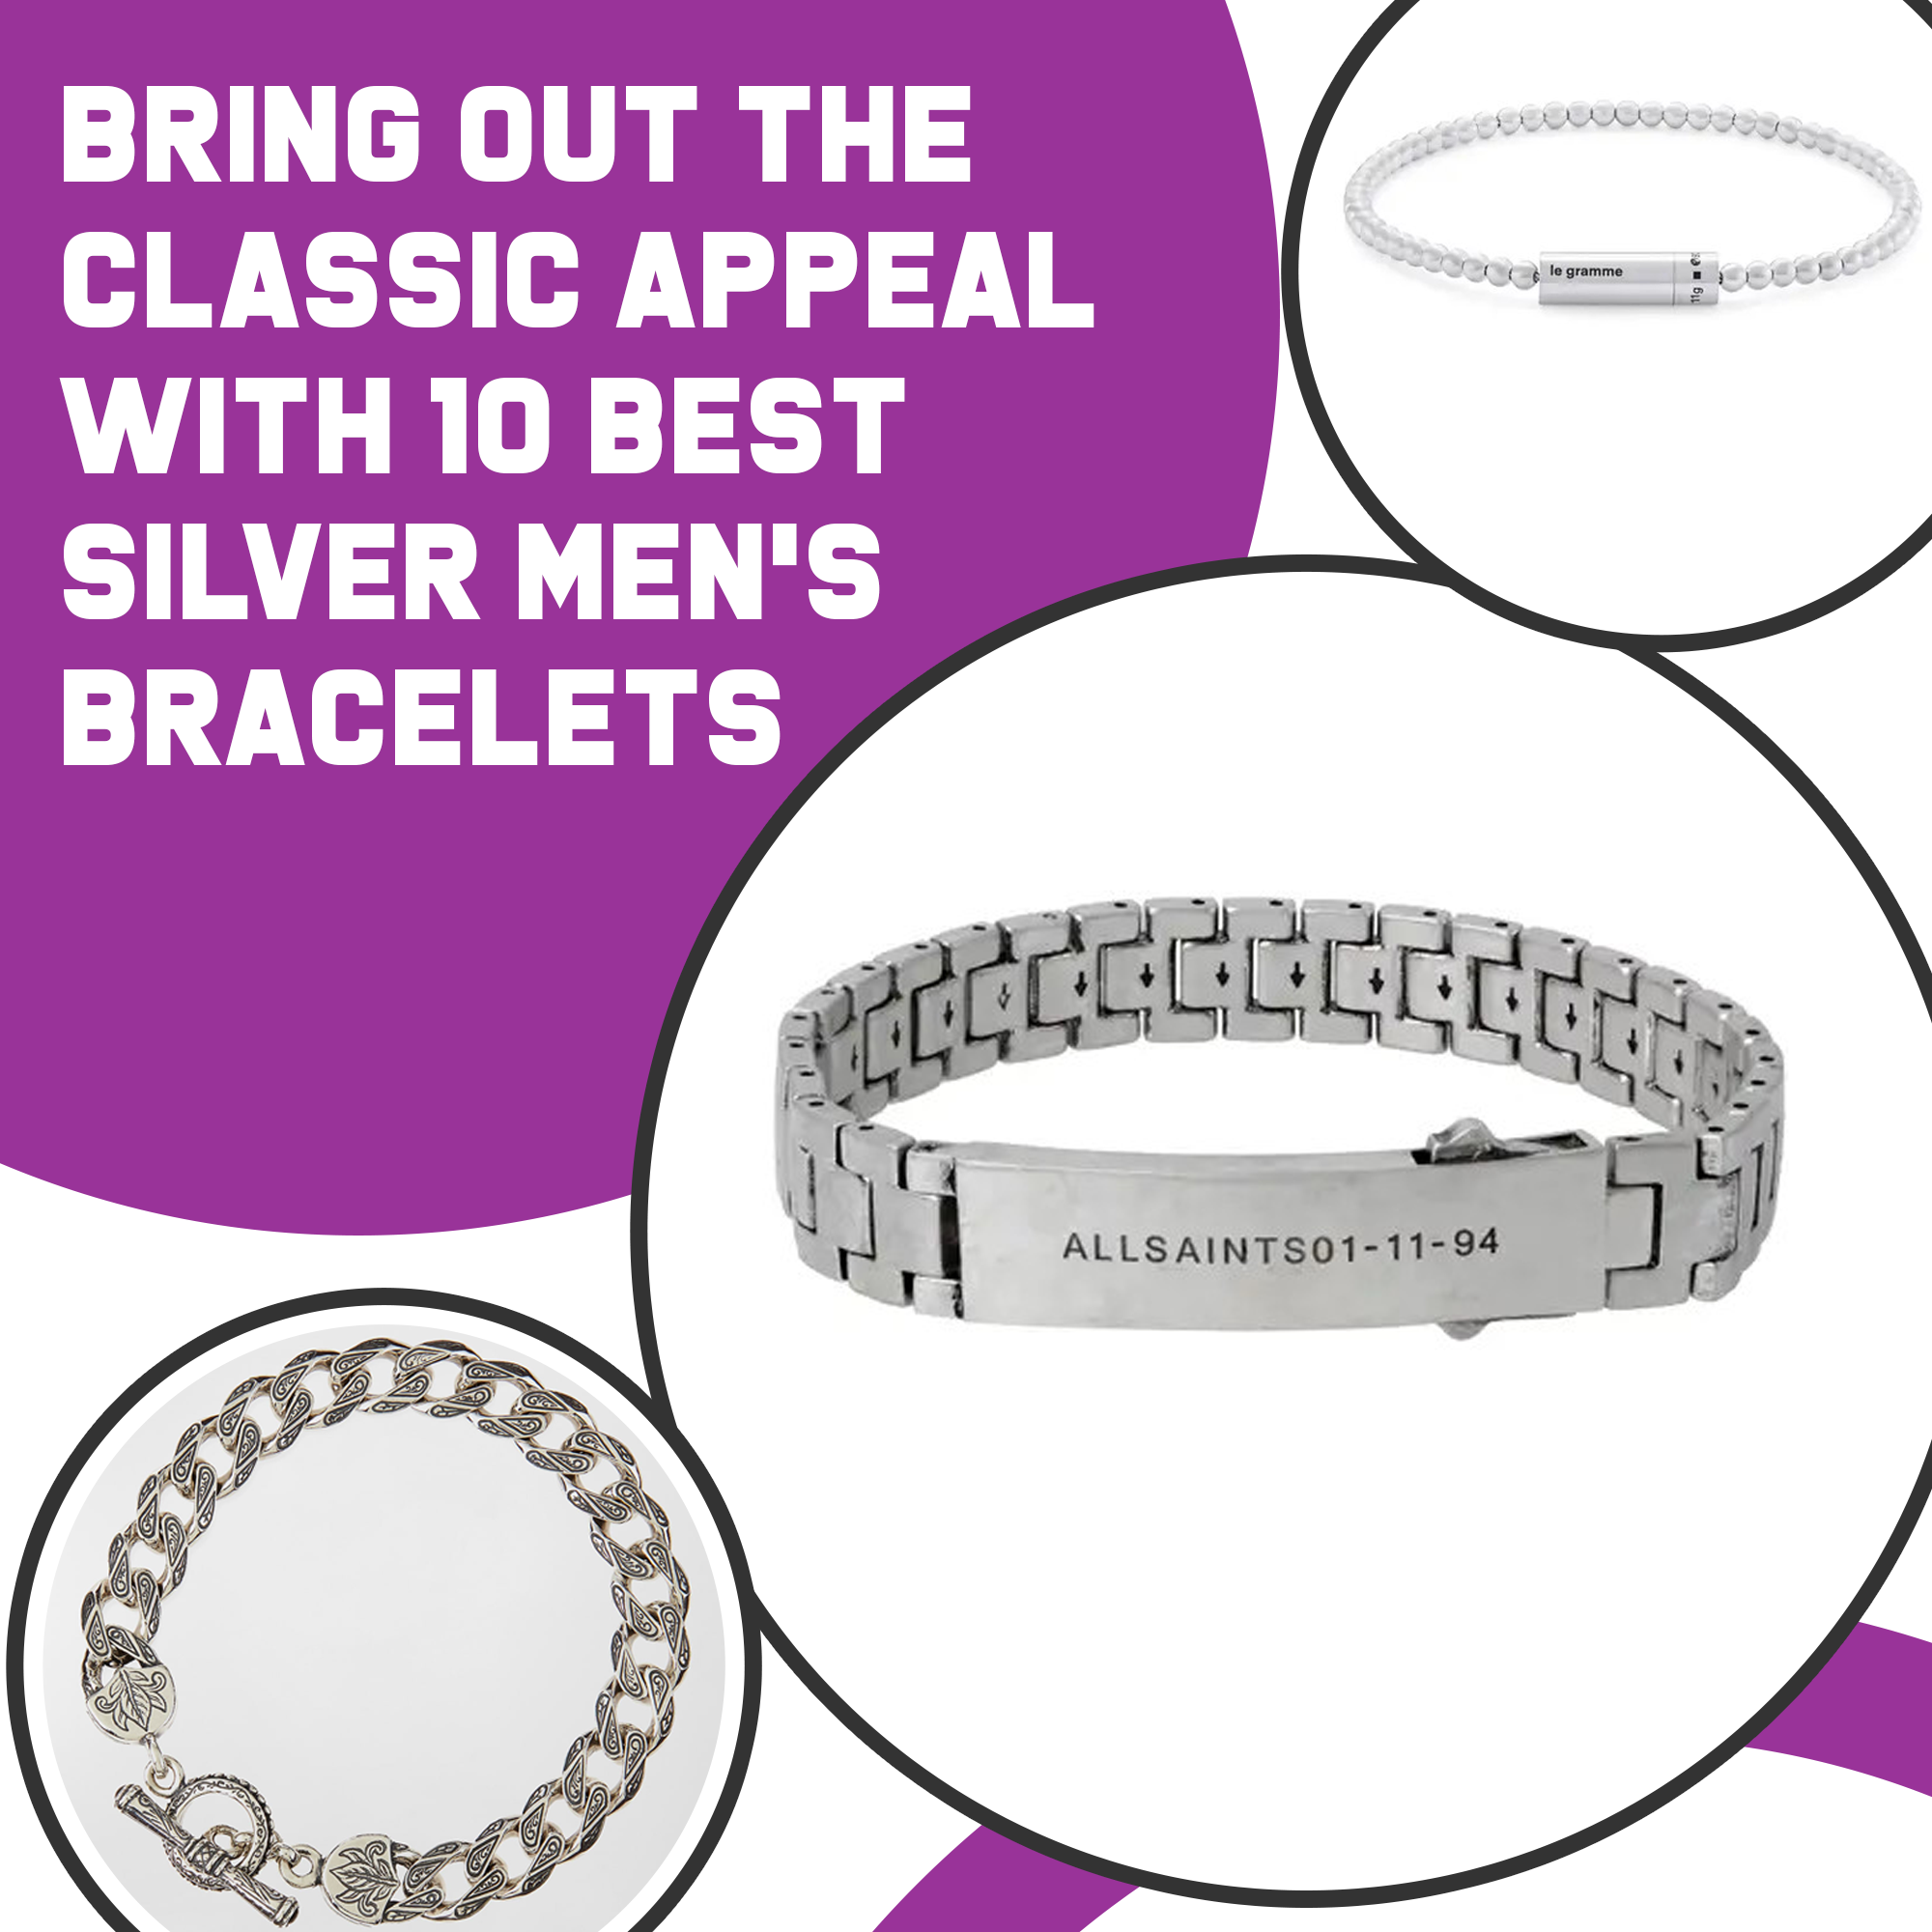 Bring Out the Classic Appeal With 10 Best Silver Men’s Bracelets